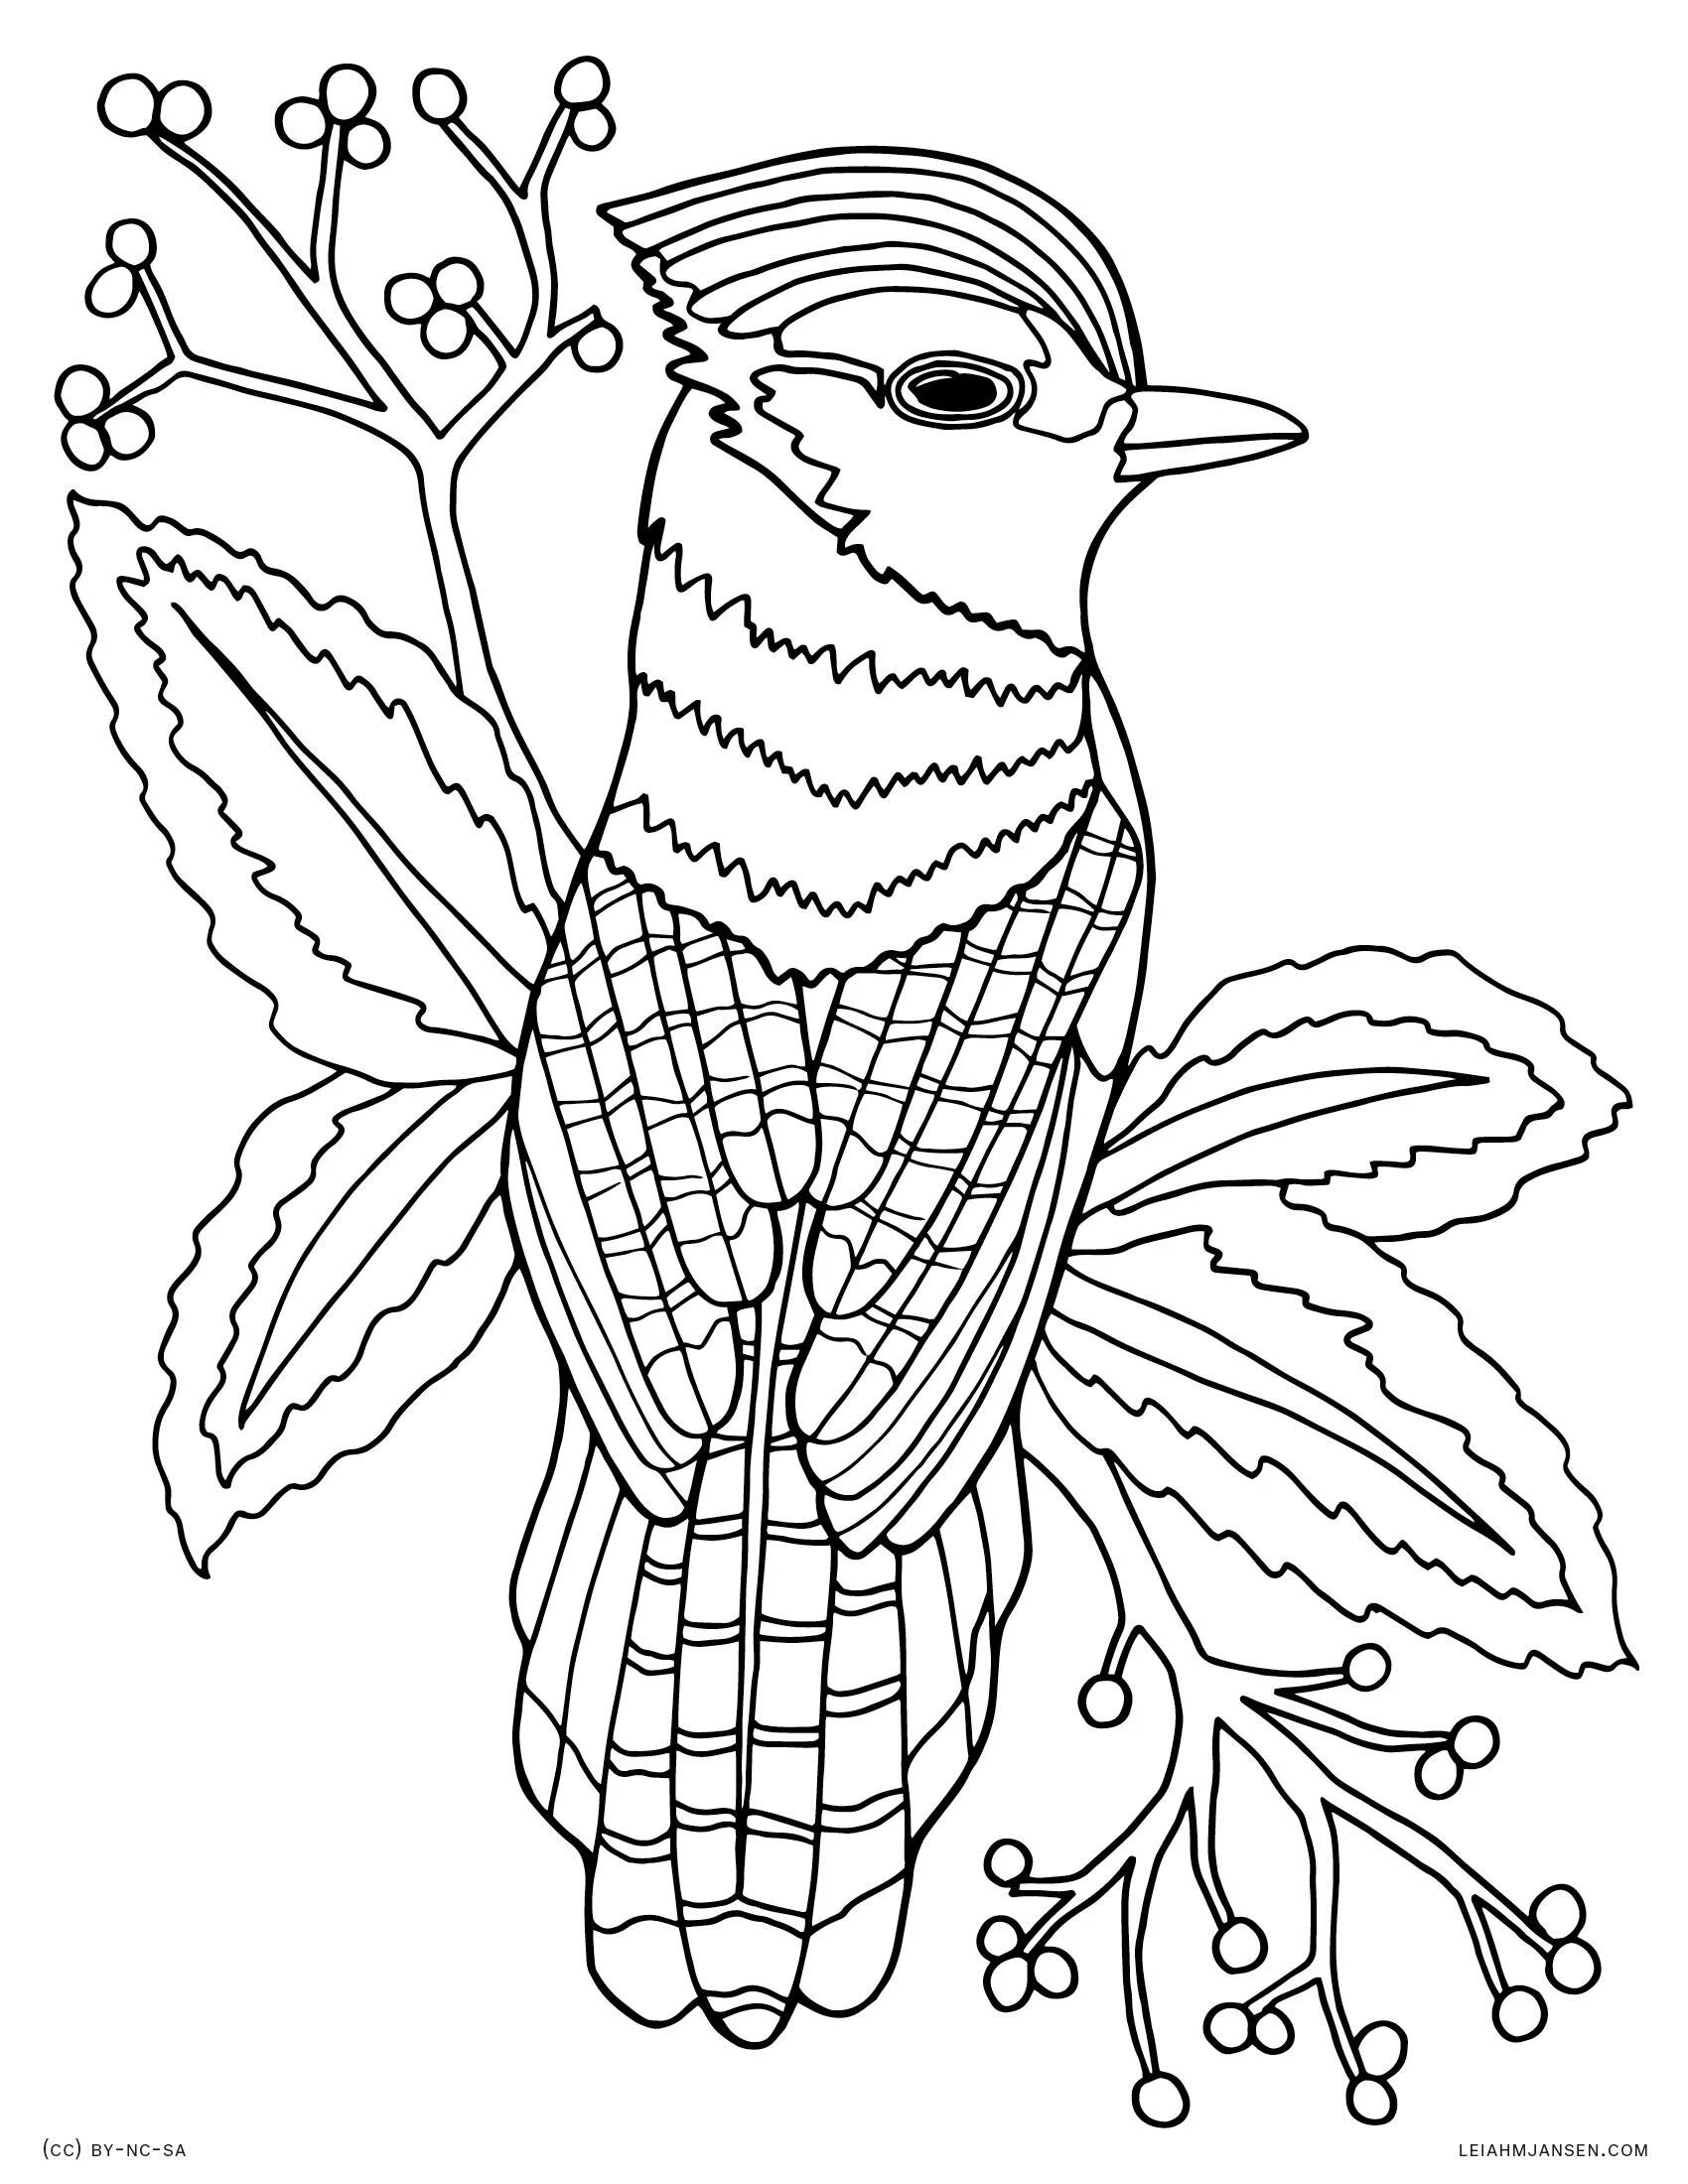 Live amazing animal coloring page